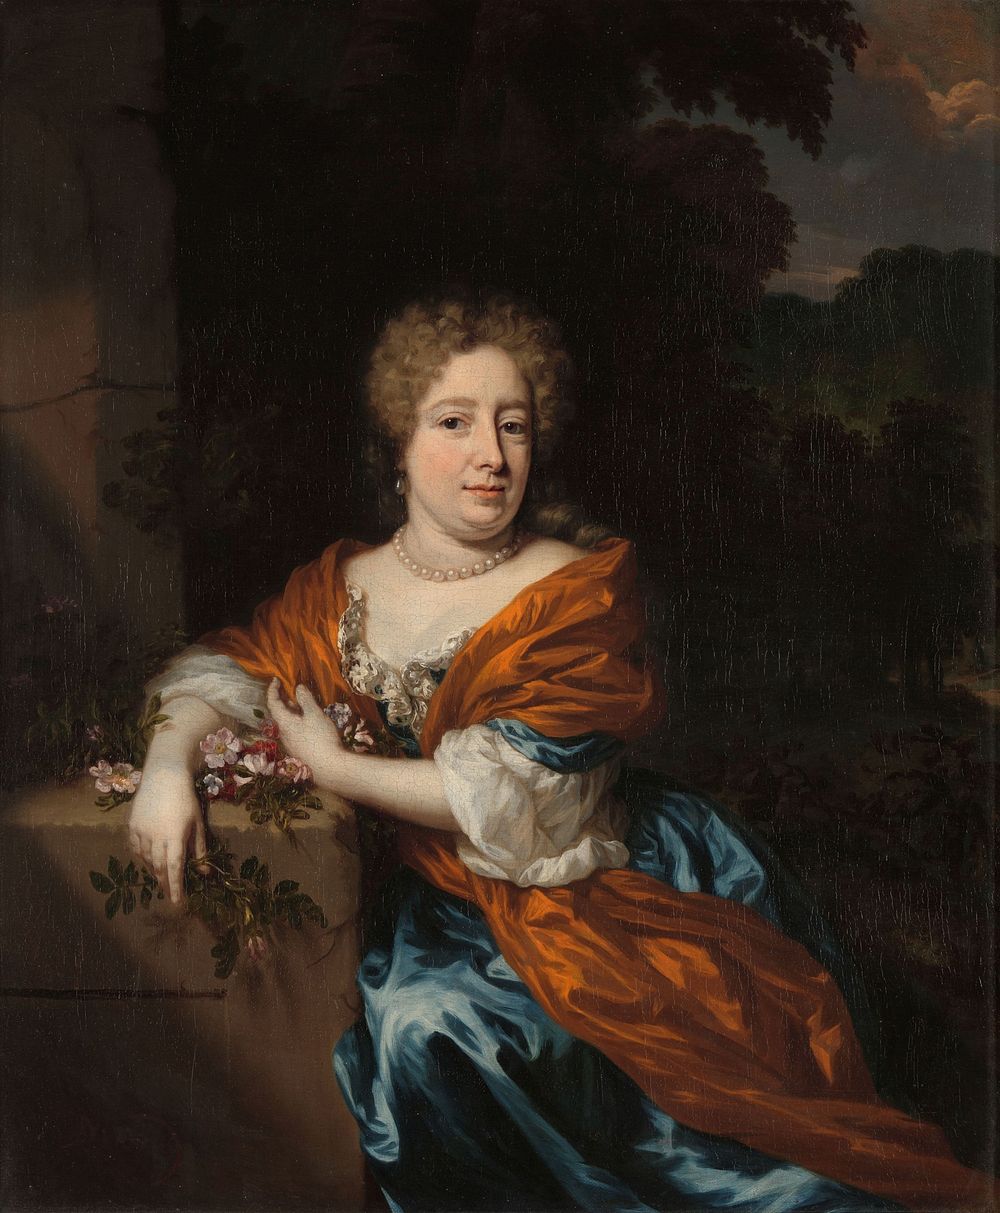 Portrait of Petronella Dunois (1677 - 1685) by Nicolaes Maes